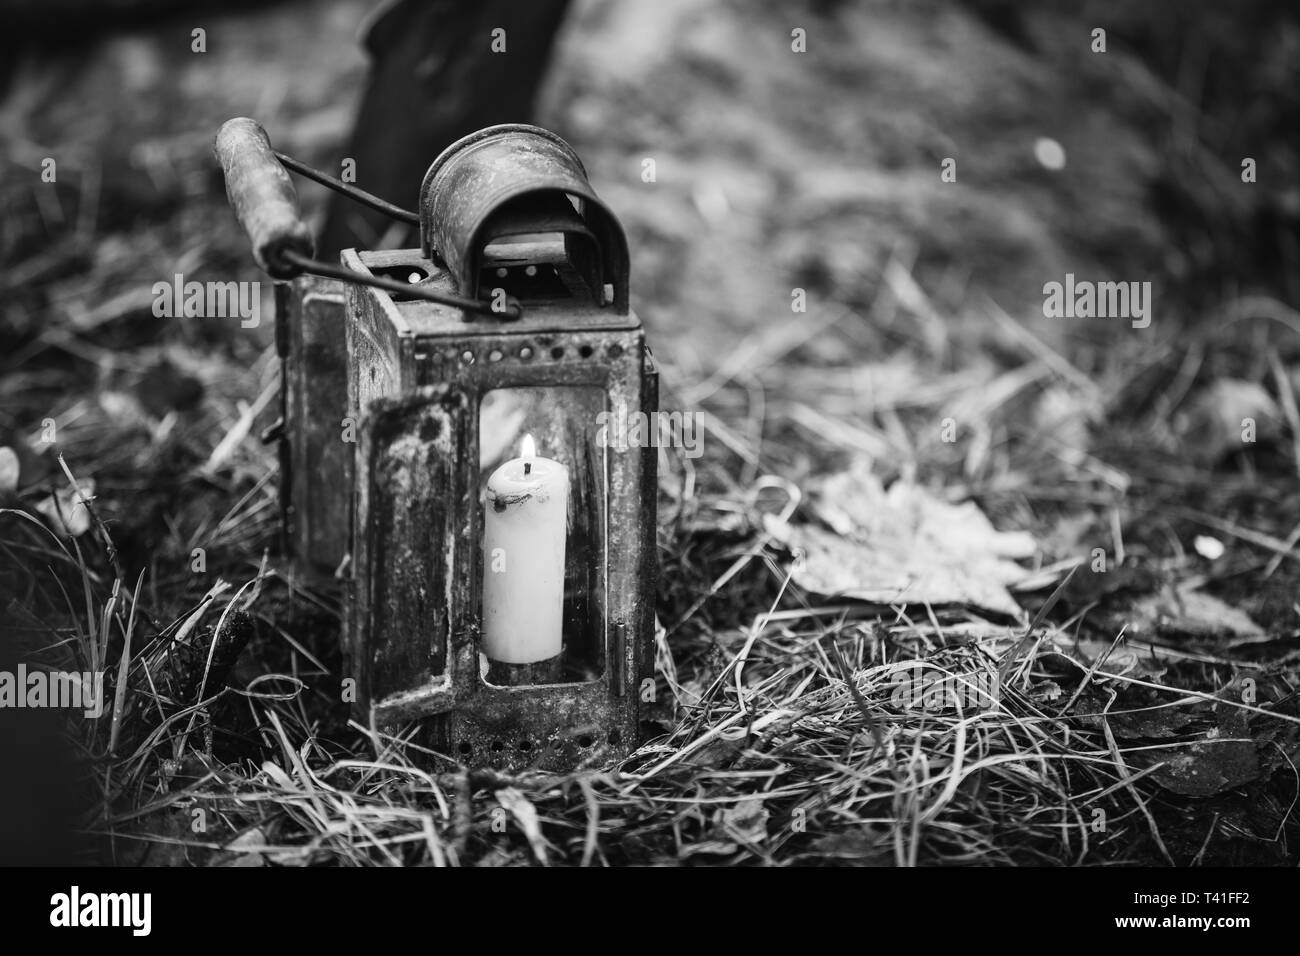 Old Vintage Lantern With Burning Candle On Forest Ground. Photo In Black And White Colors Stock Photo